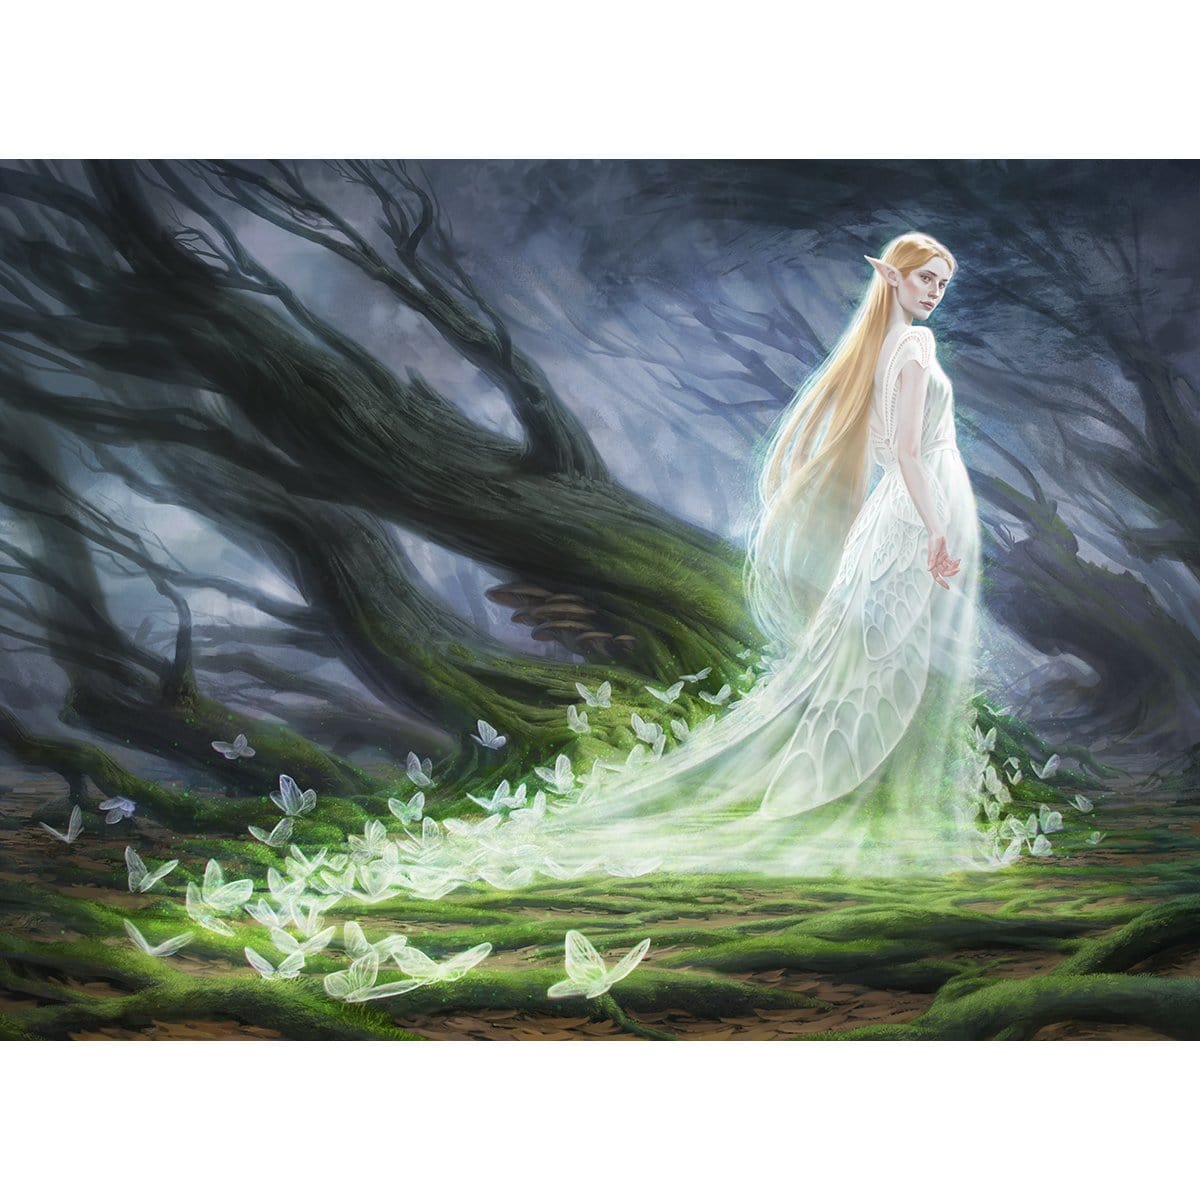 Elvish Spirit Guide Print - Print - Original Magic Art - Accessories for Magic the Gathering and other card games